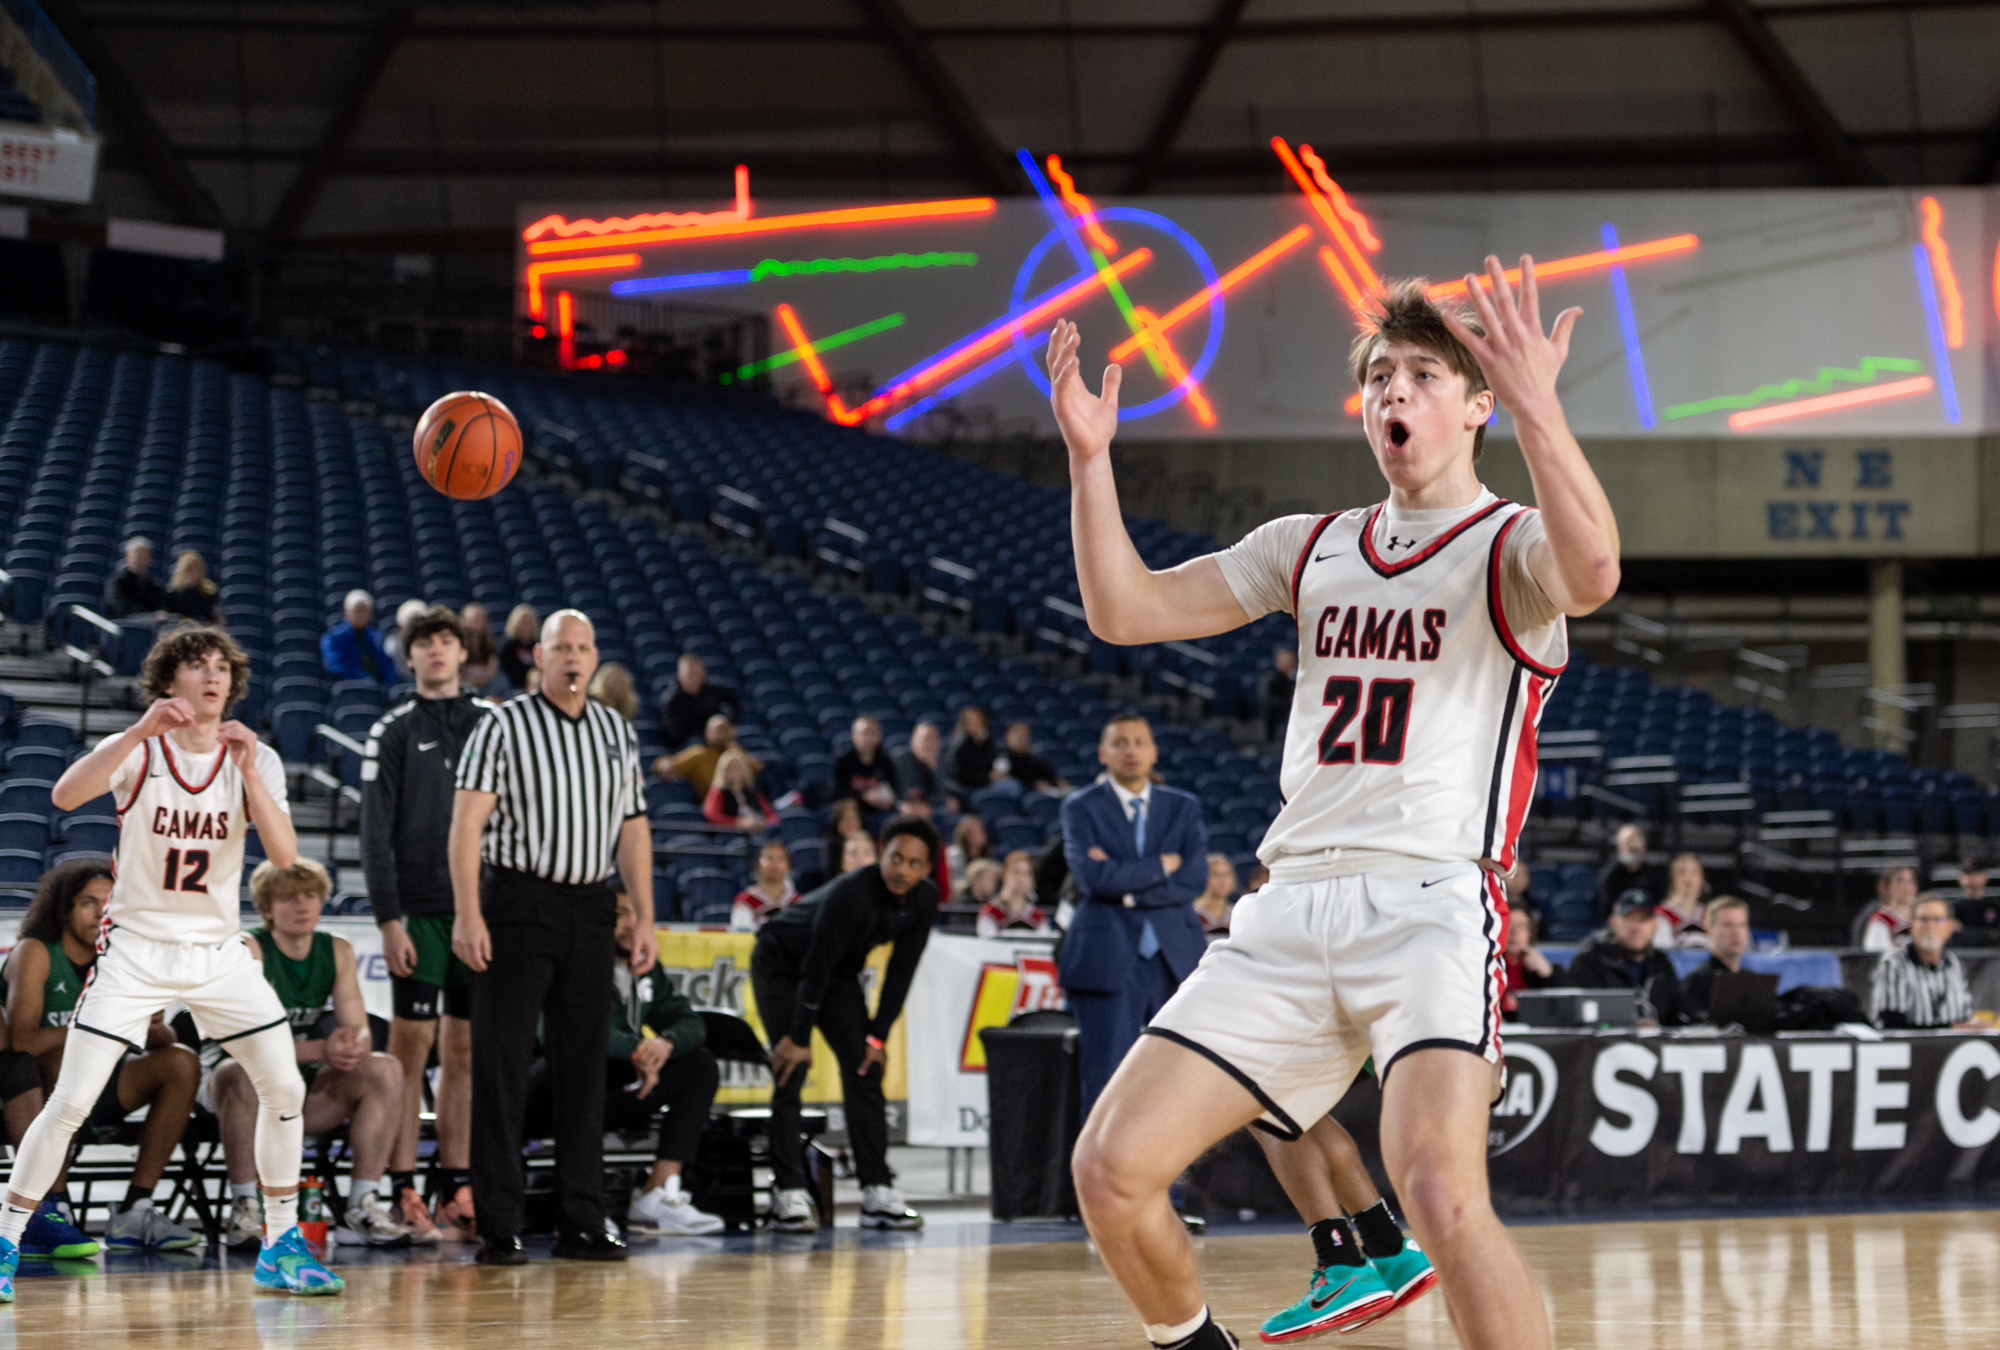 Camas senior guard Theo McMillan reacts to not getting a pass as he cut through the lane during a Class 4A State boys basketball game on Friday, March 3, 2023, at the Tacoma Dome.